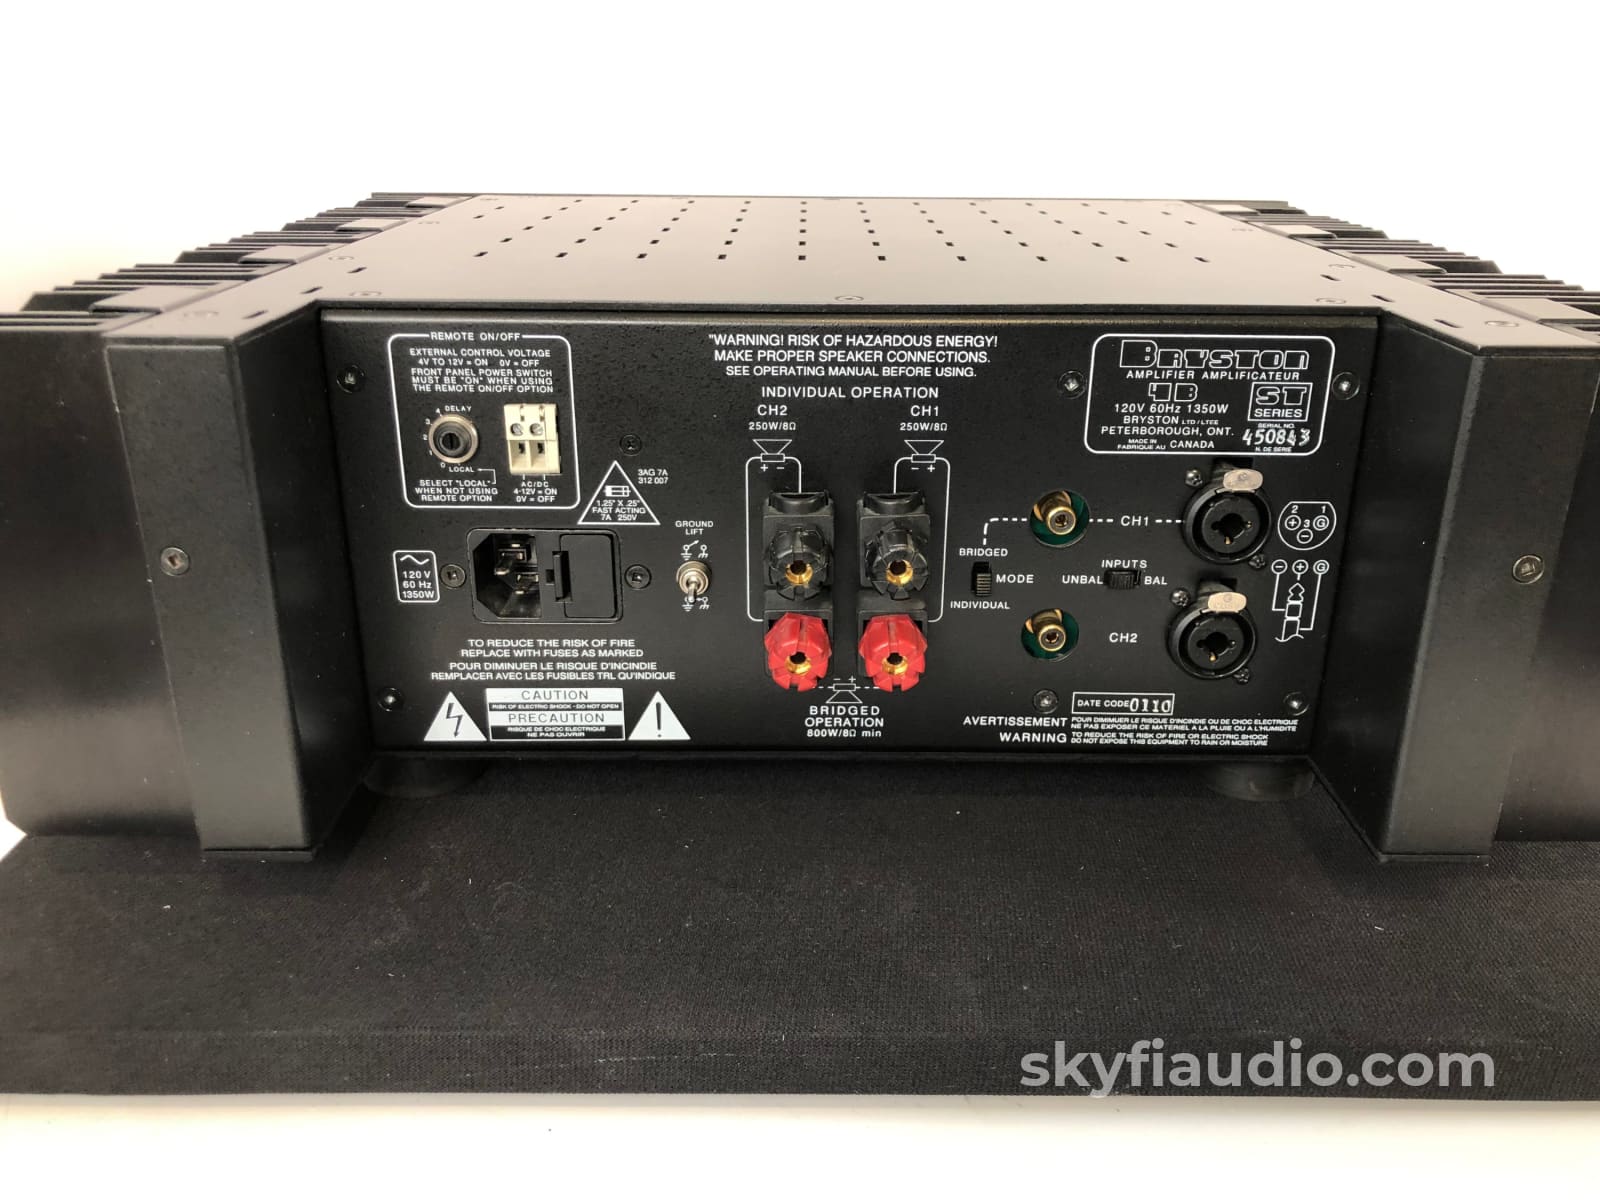 Bryston 4B-St Solid State Stereo Amplifier In Box - Under Warranty